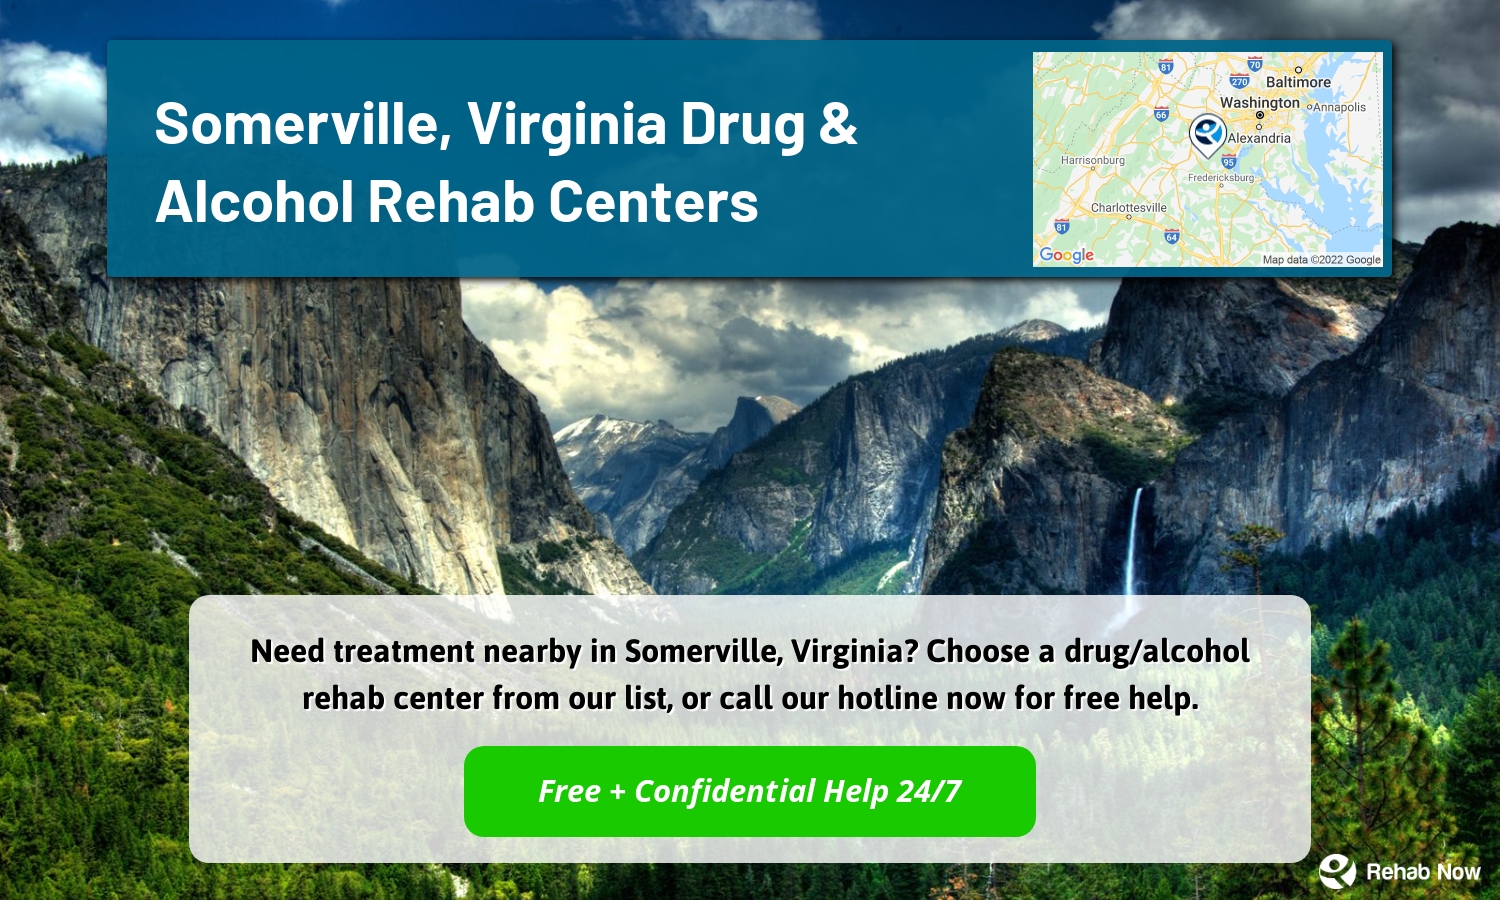 Need treatment nearby in Somerville, Virginia? Choose a drug/alcohol rehab center from our list, or call our hotline now for free help.